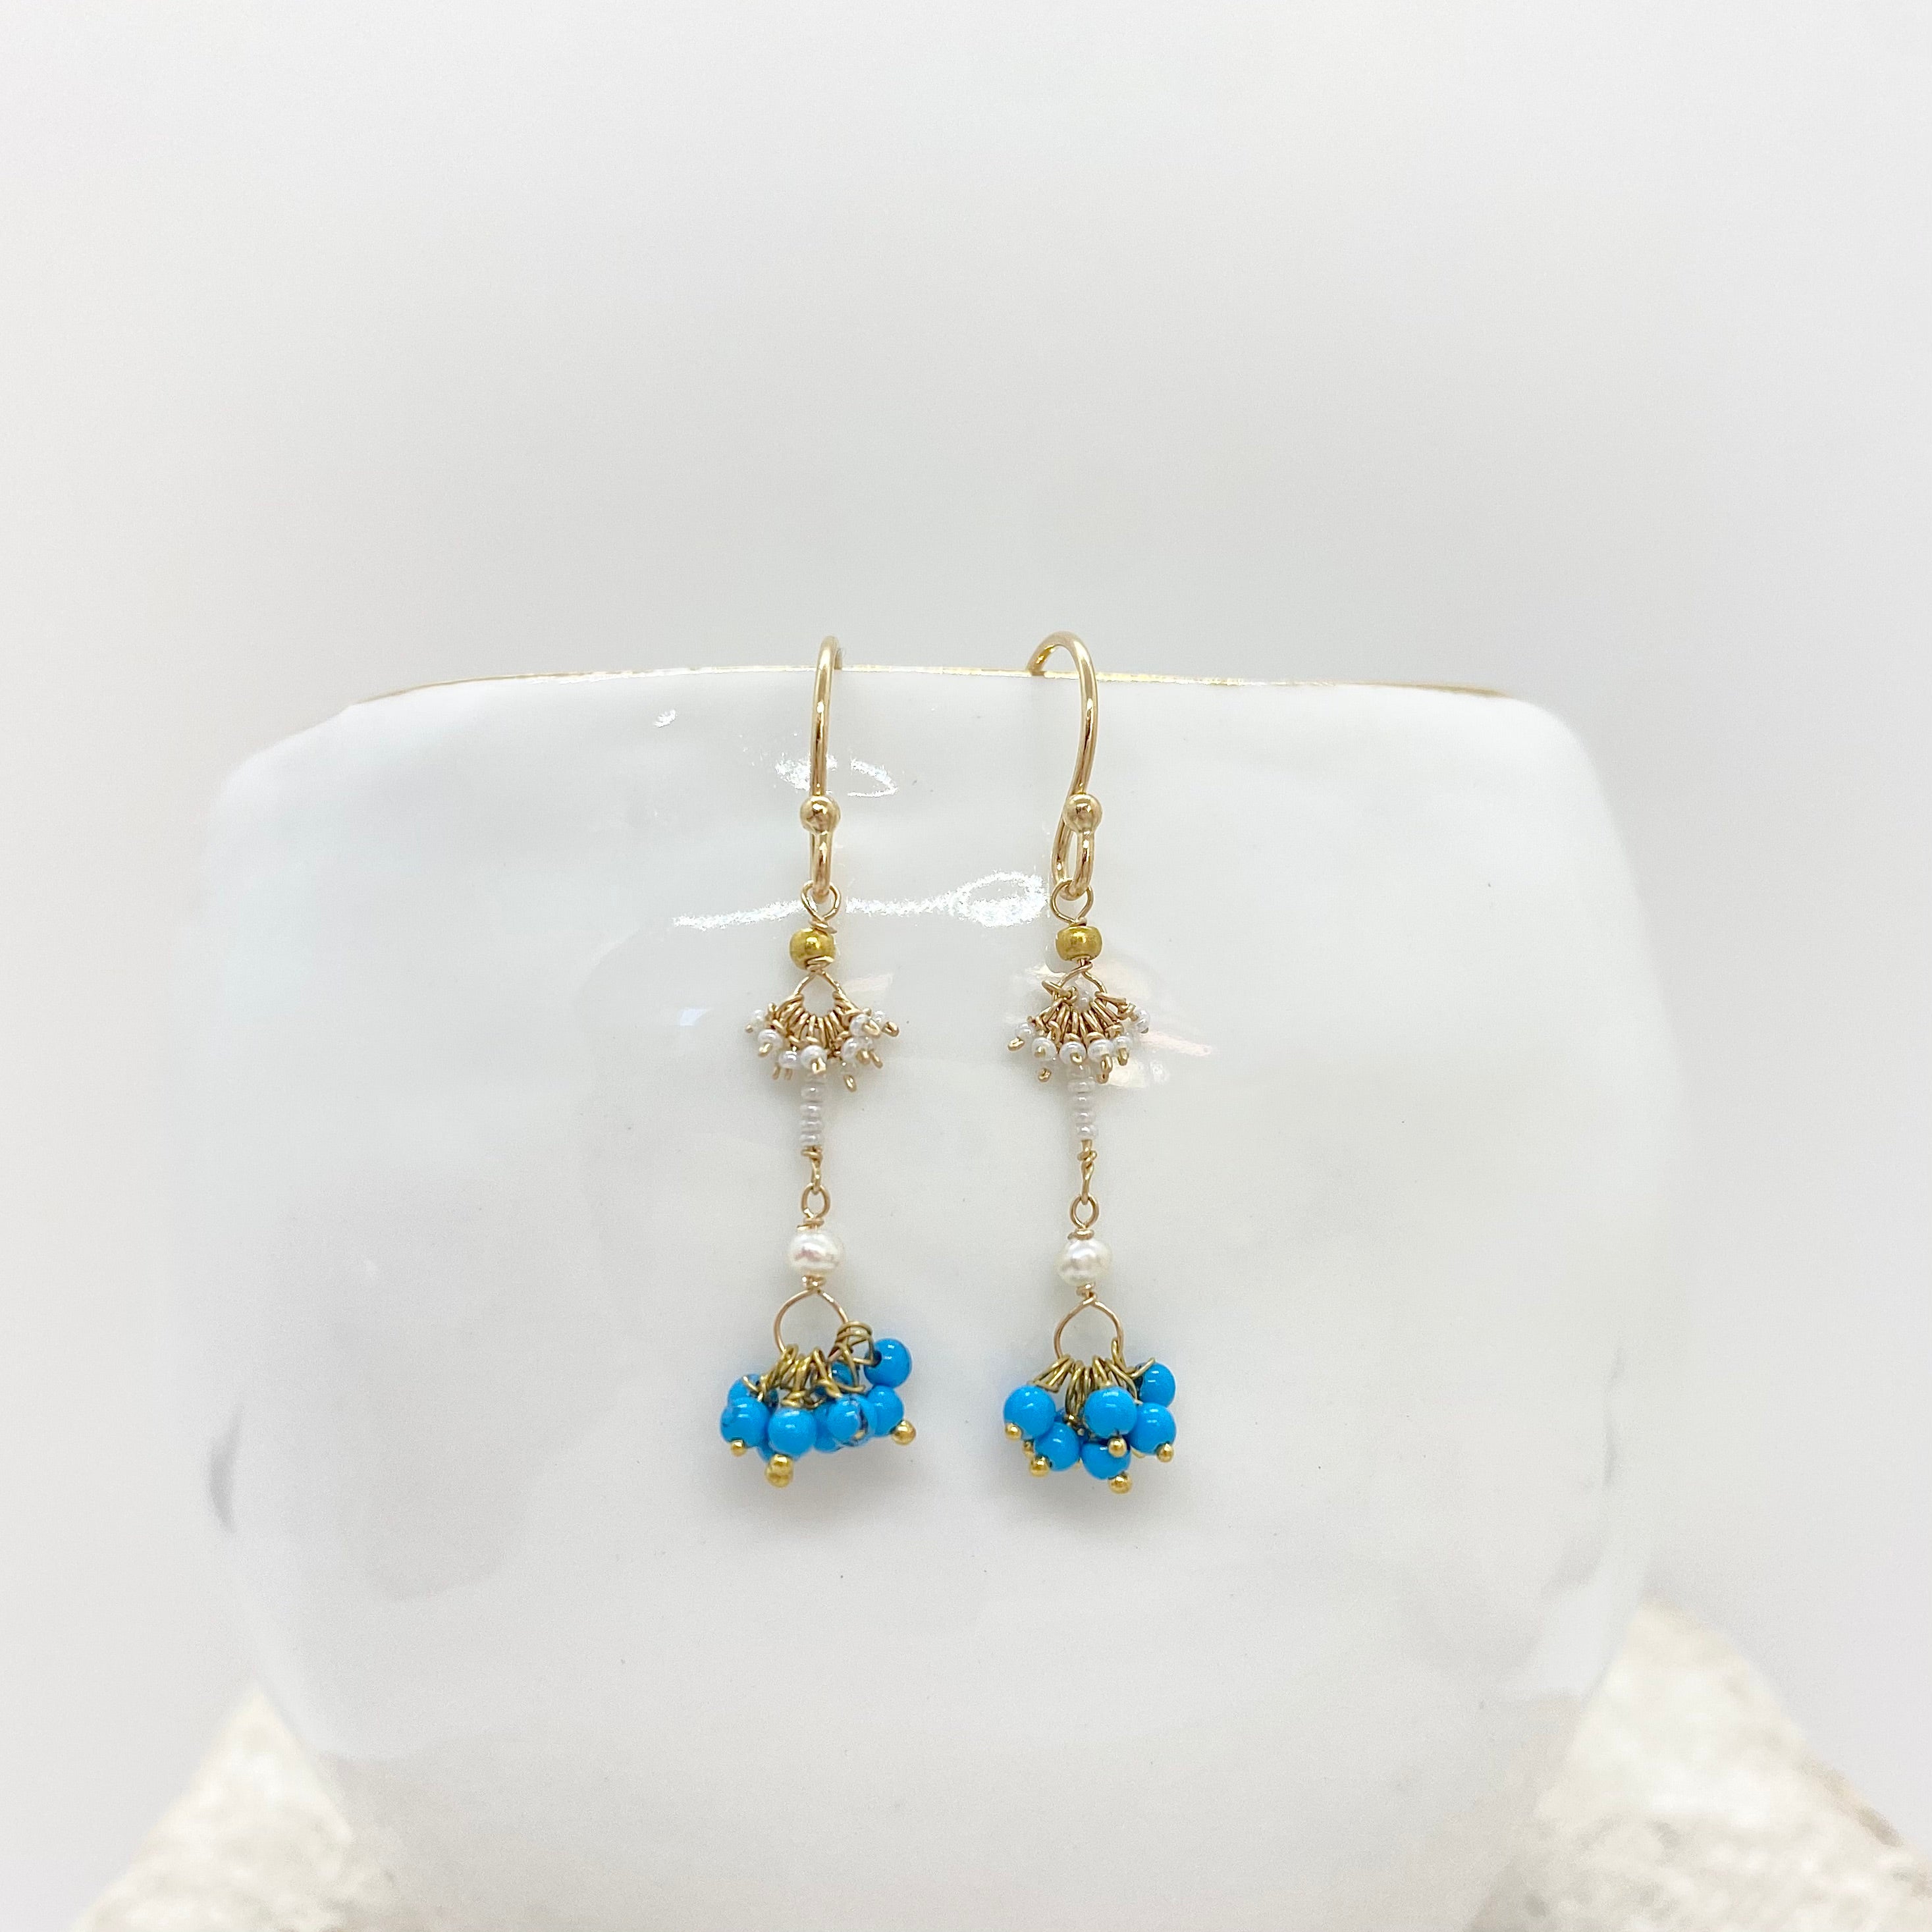 14k Gold Earrings w/ Turquoise, Freshwater Pearl, 18k Gold Nugget & Antique Italian Beads